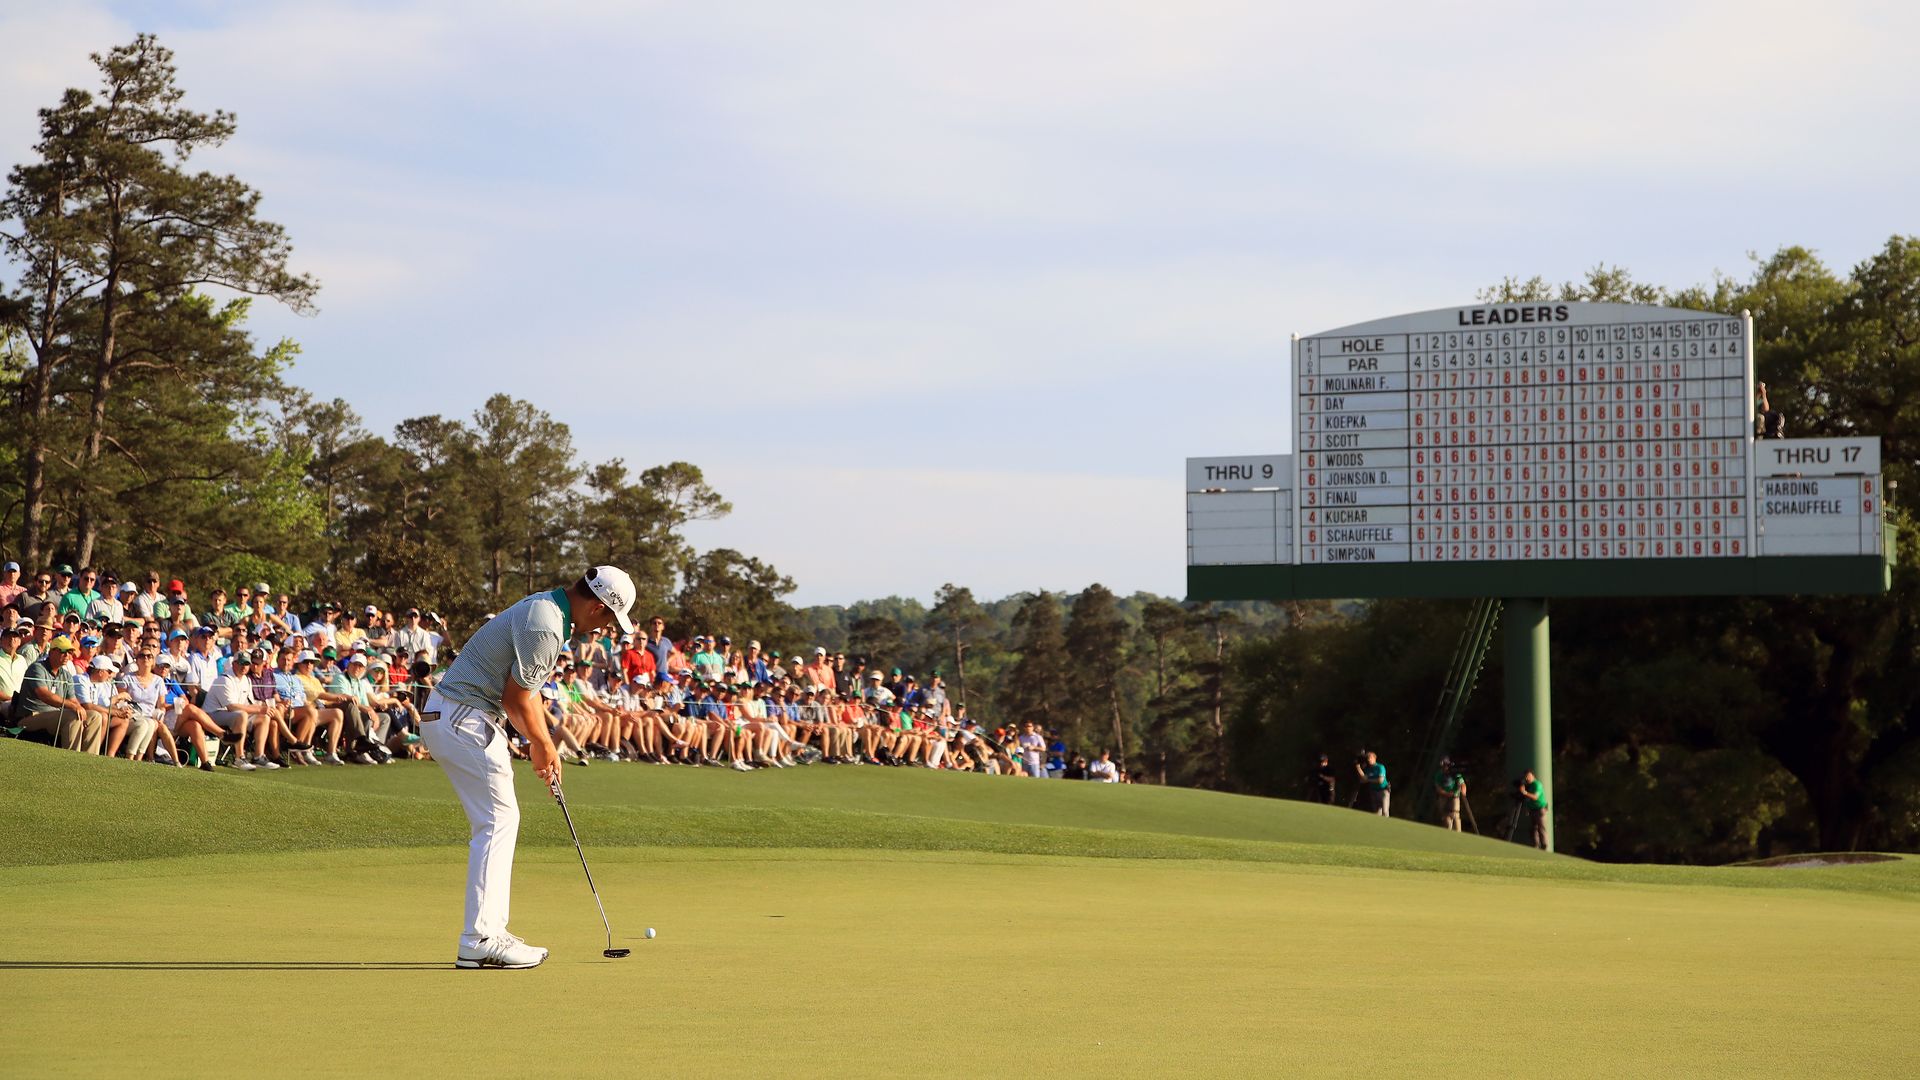 Xander Schauffele of the United States putts on the 18th green during the third round of the Masters at Augusta National Golf Club on April 13, 2019 in Augusta, Georgia.